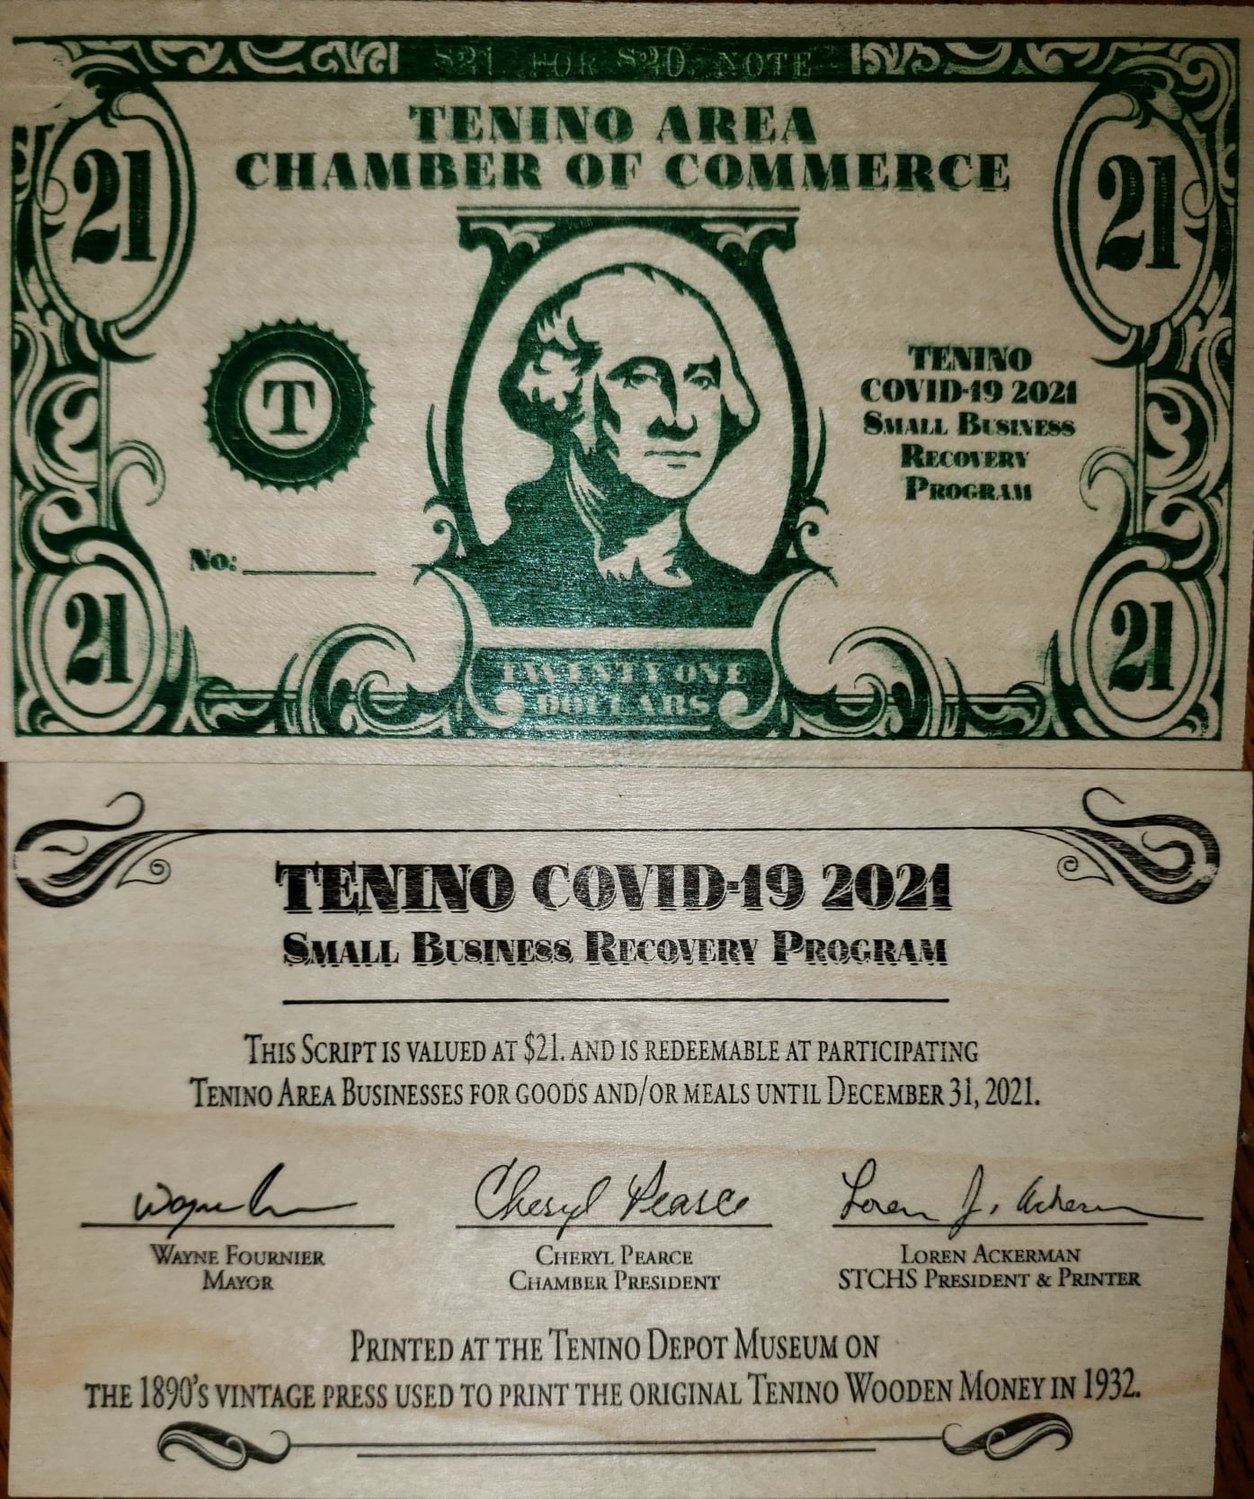 The front and pack of Tenino’s new wooden currency are seen in this photograph provided by the Tenino Area Chamber of Commerce.